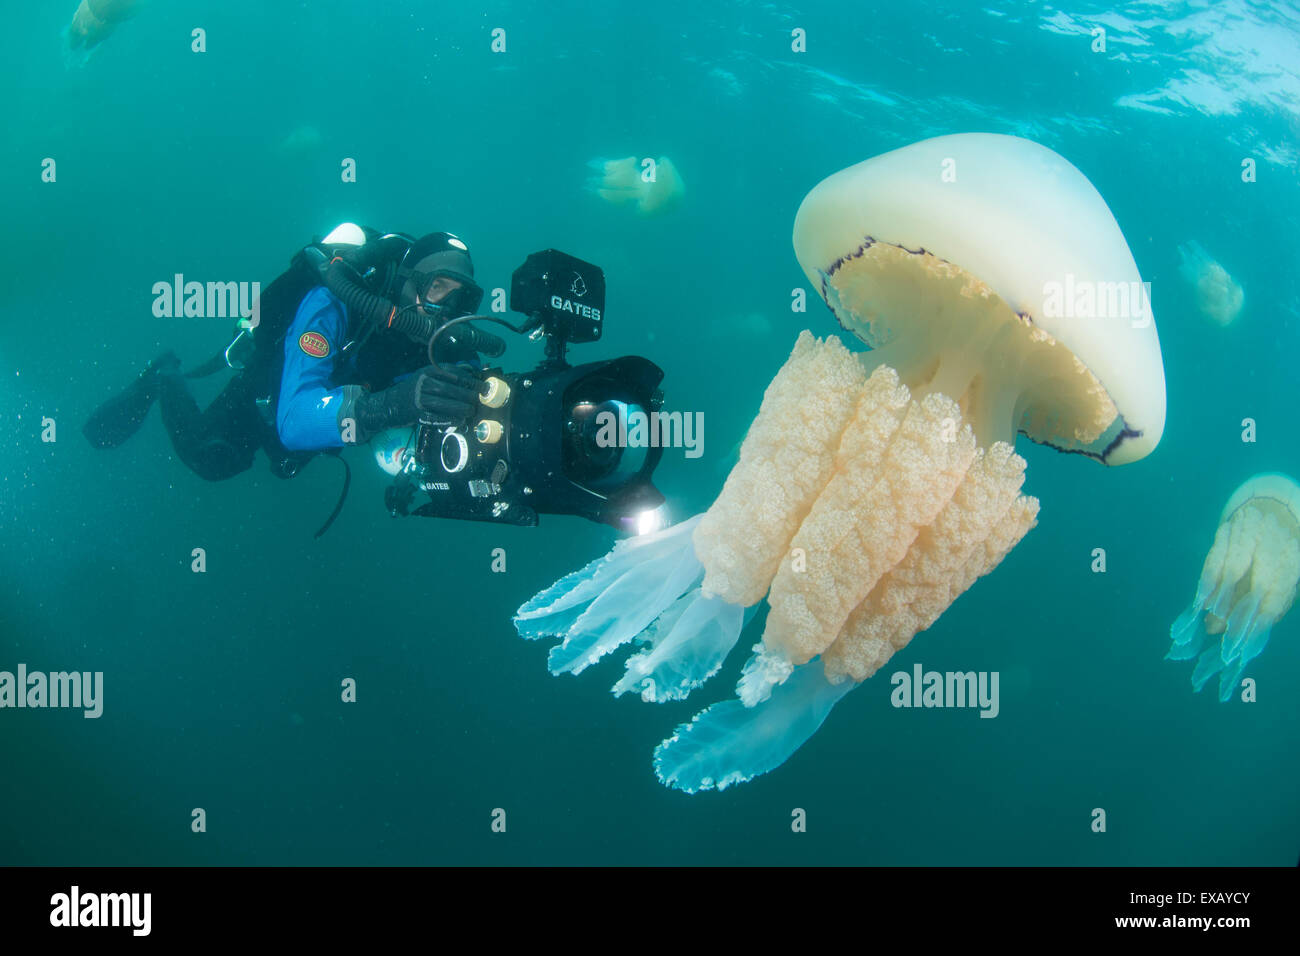 Barrel Jelly fish with diver of the coat of Devon UK. Stock Photo